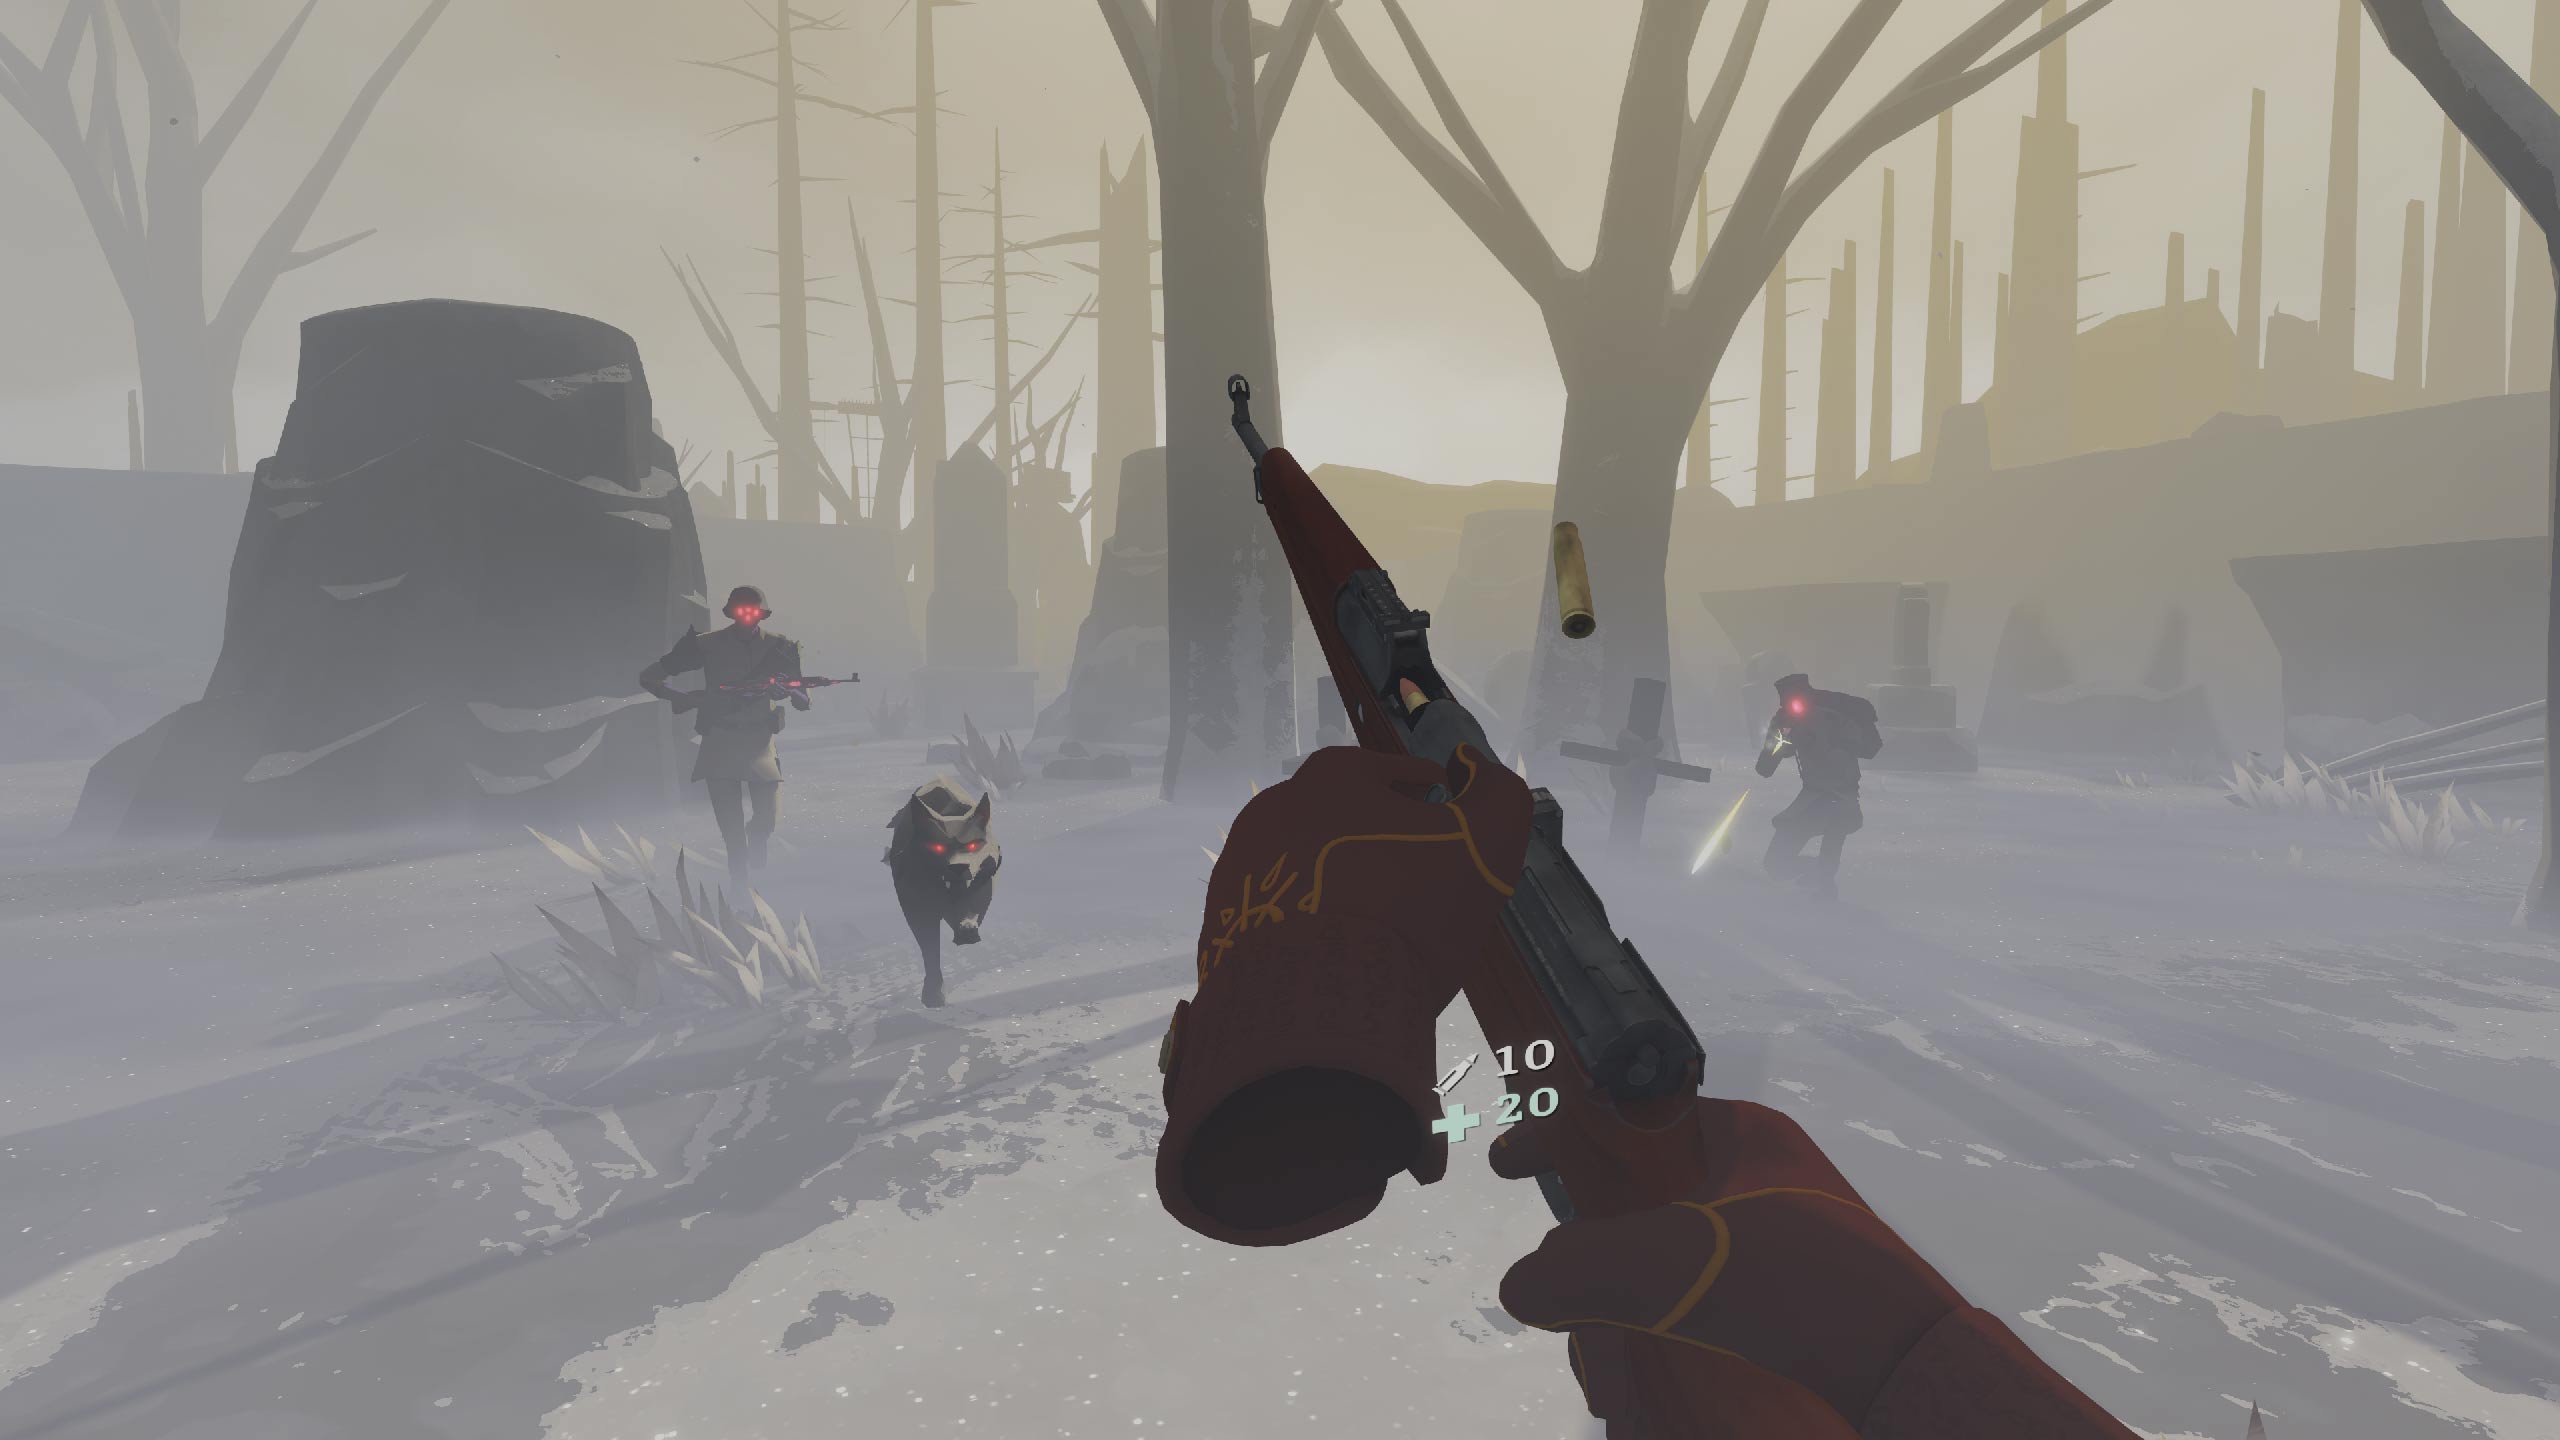 Major ‘The Light Brigade’ Update Brings New Player Classes, Items, Levels & More – Road to VR